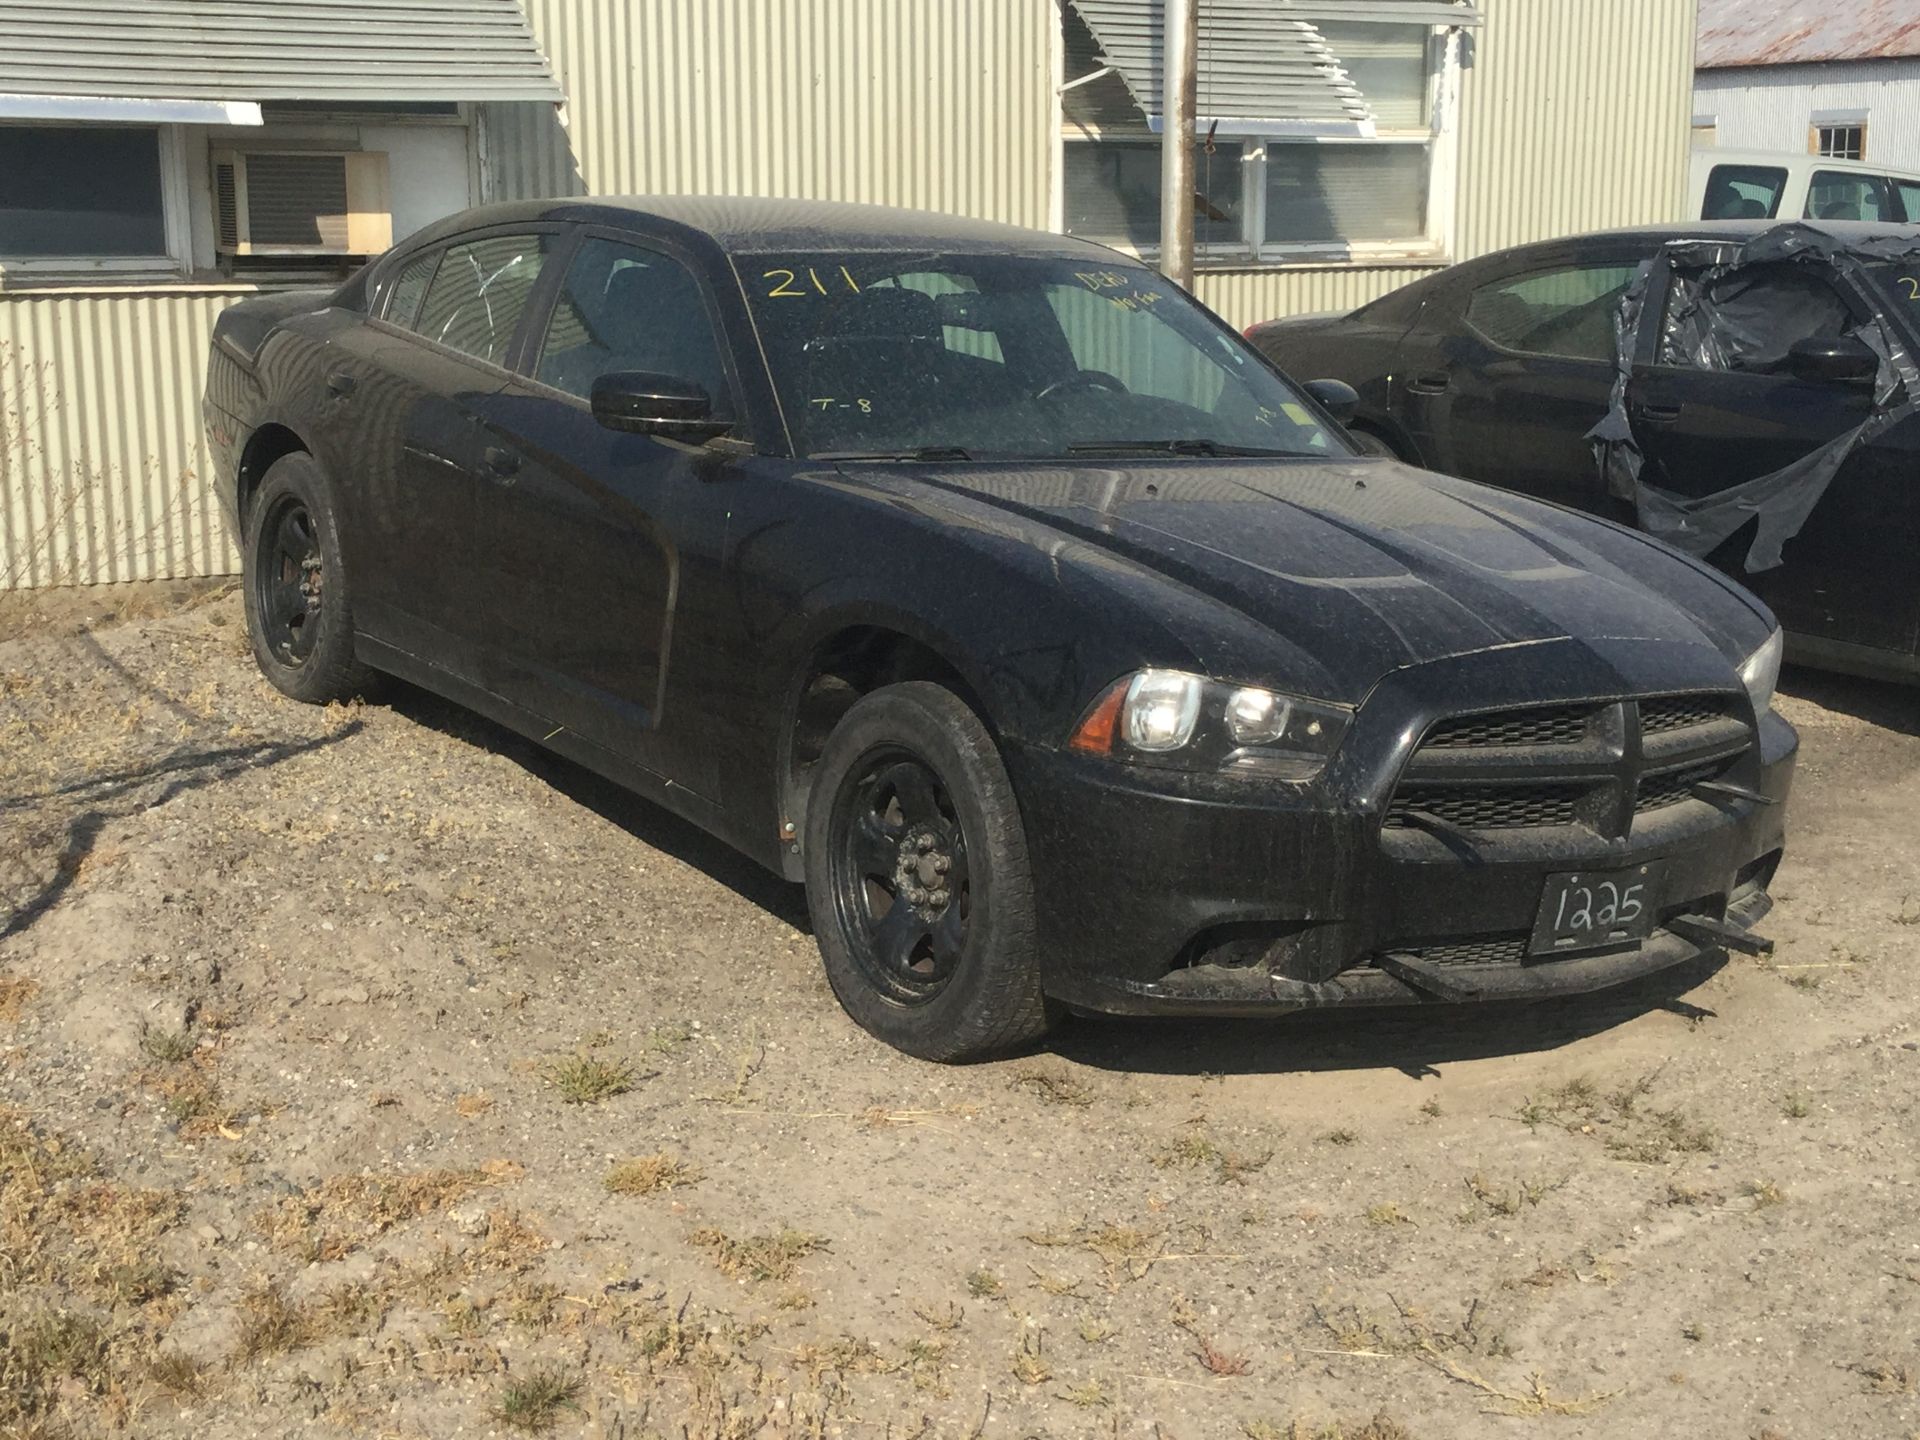 Year: 2011 Make: Dodge Model: Charger Type: Sedan Vin#: 572320 Mileage/Hours: 109640 5.7L, auto, CC, - Image 3 of 4